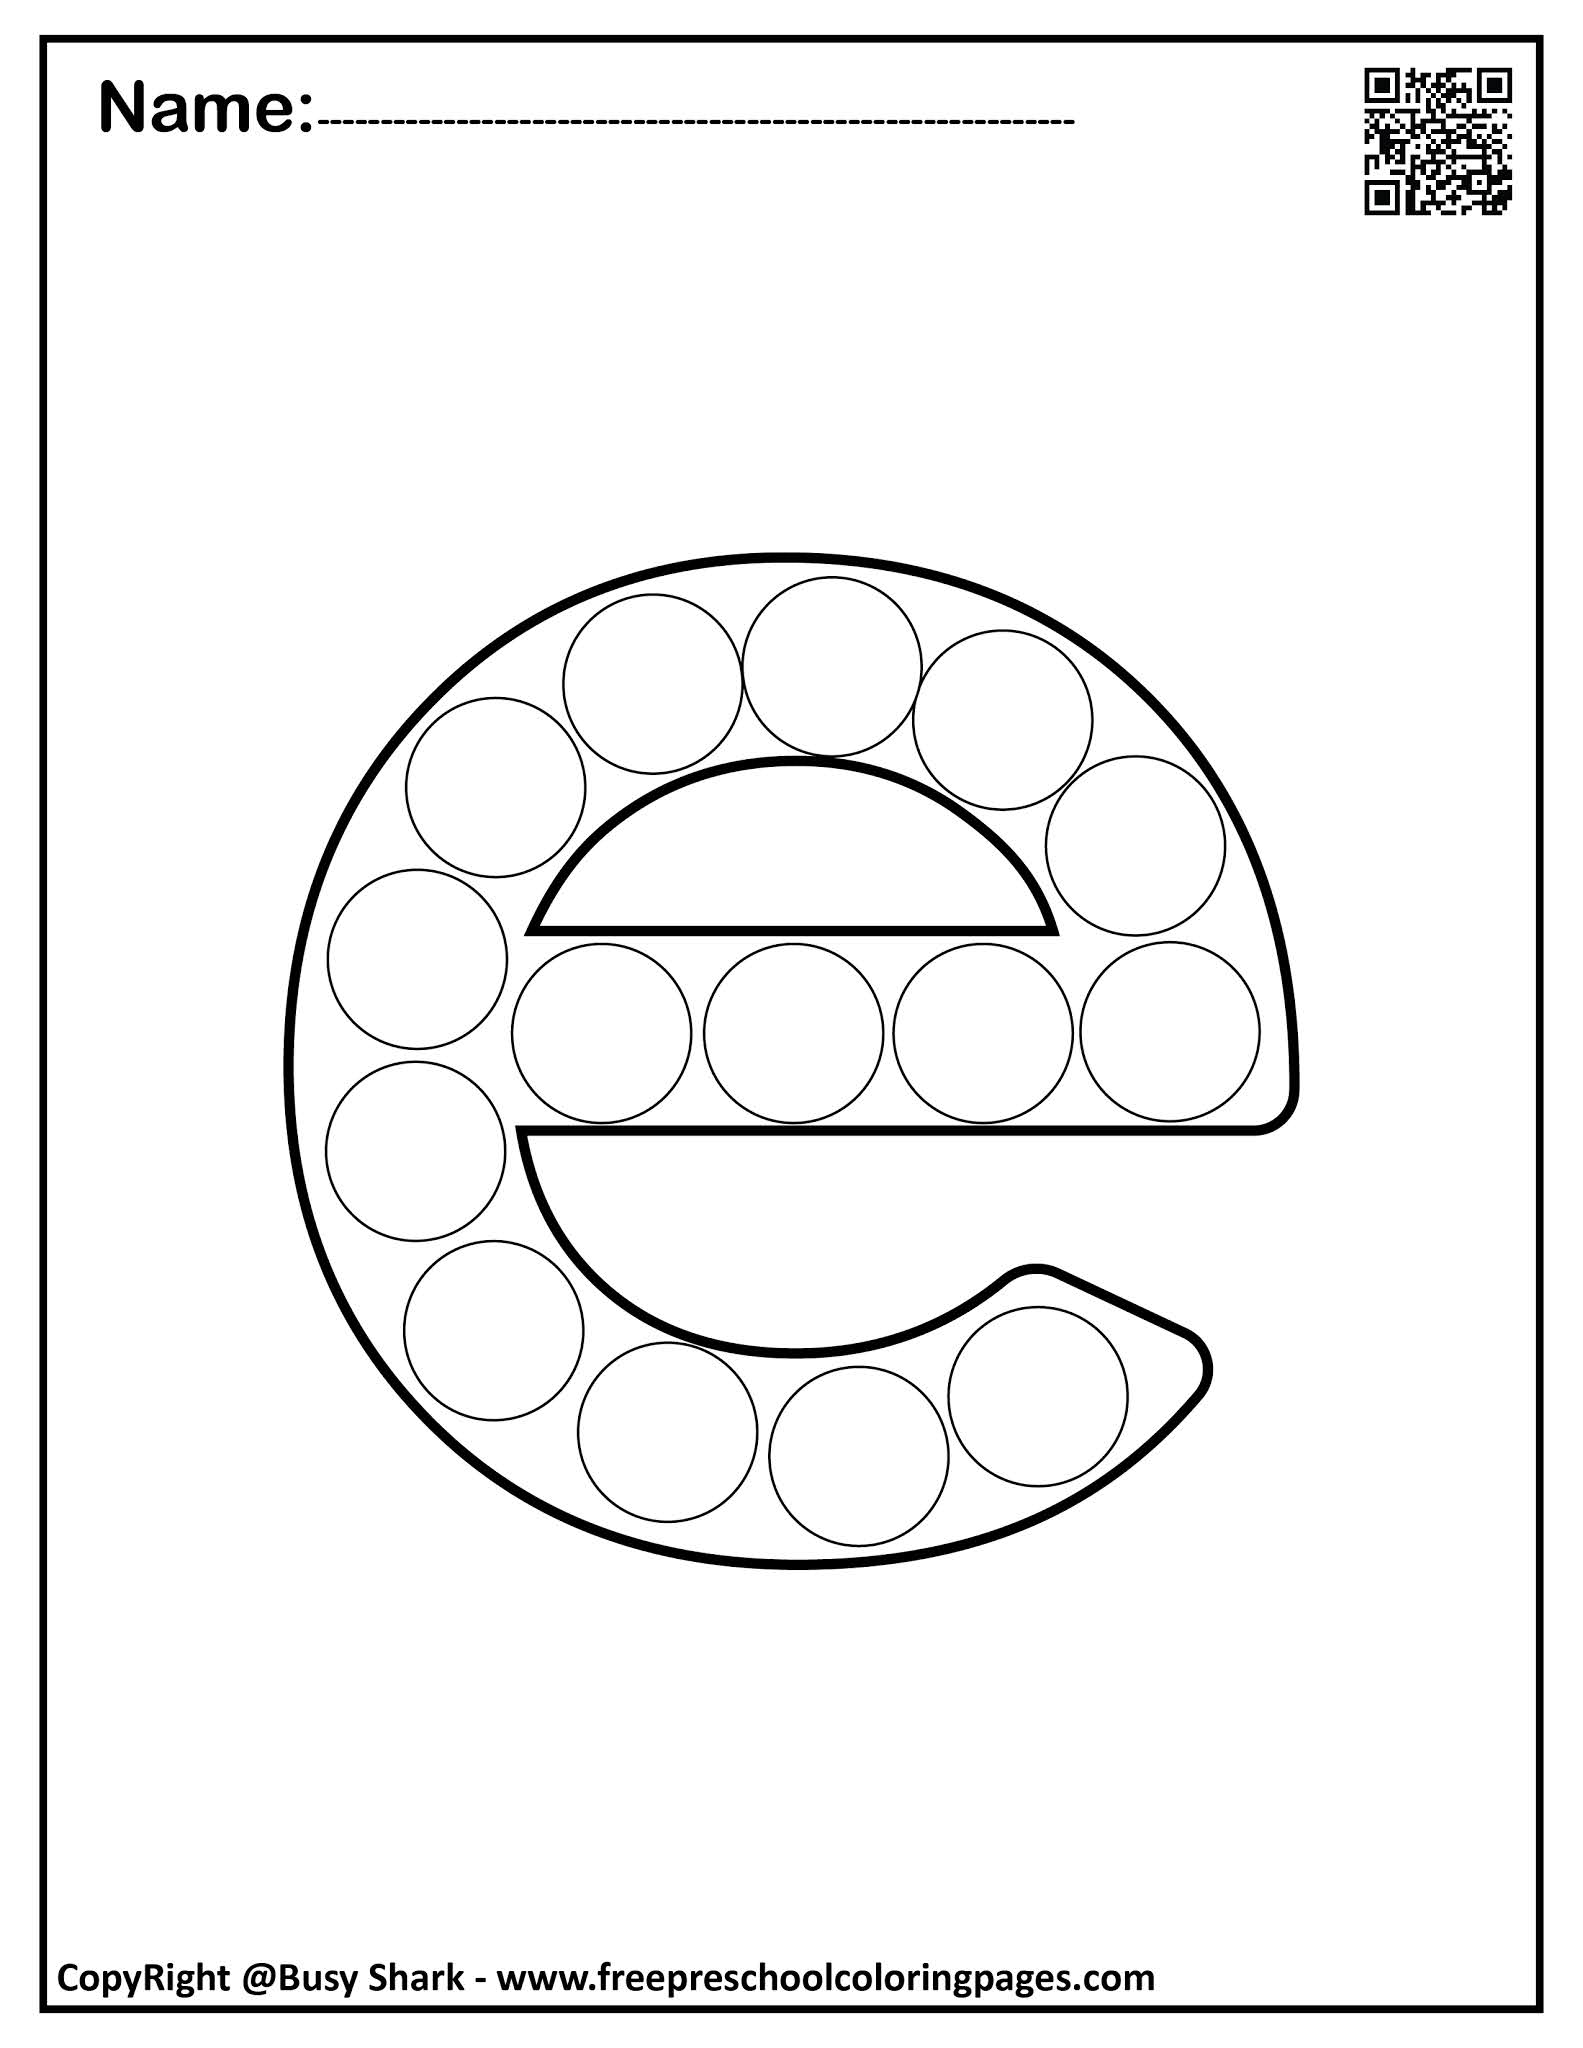 My Letter E Coloring Page  Letter e activities, Alphabet coloring